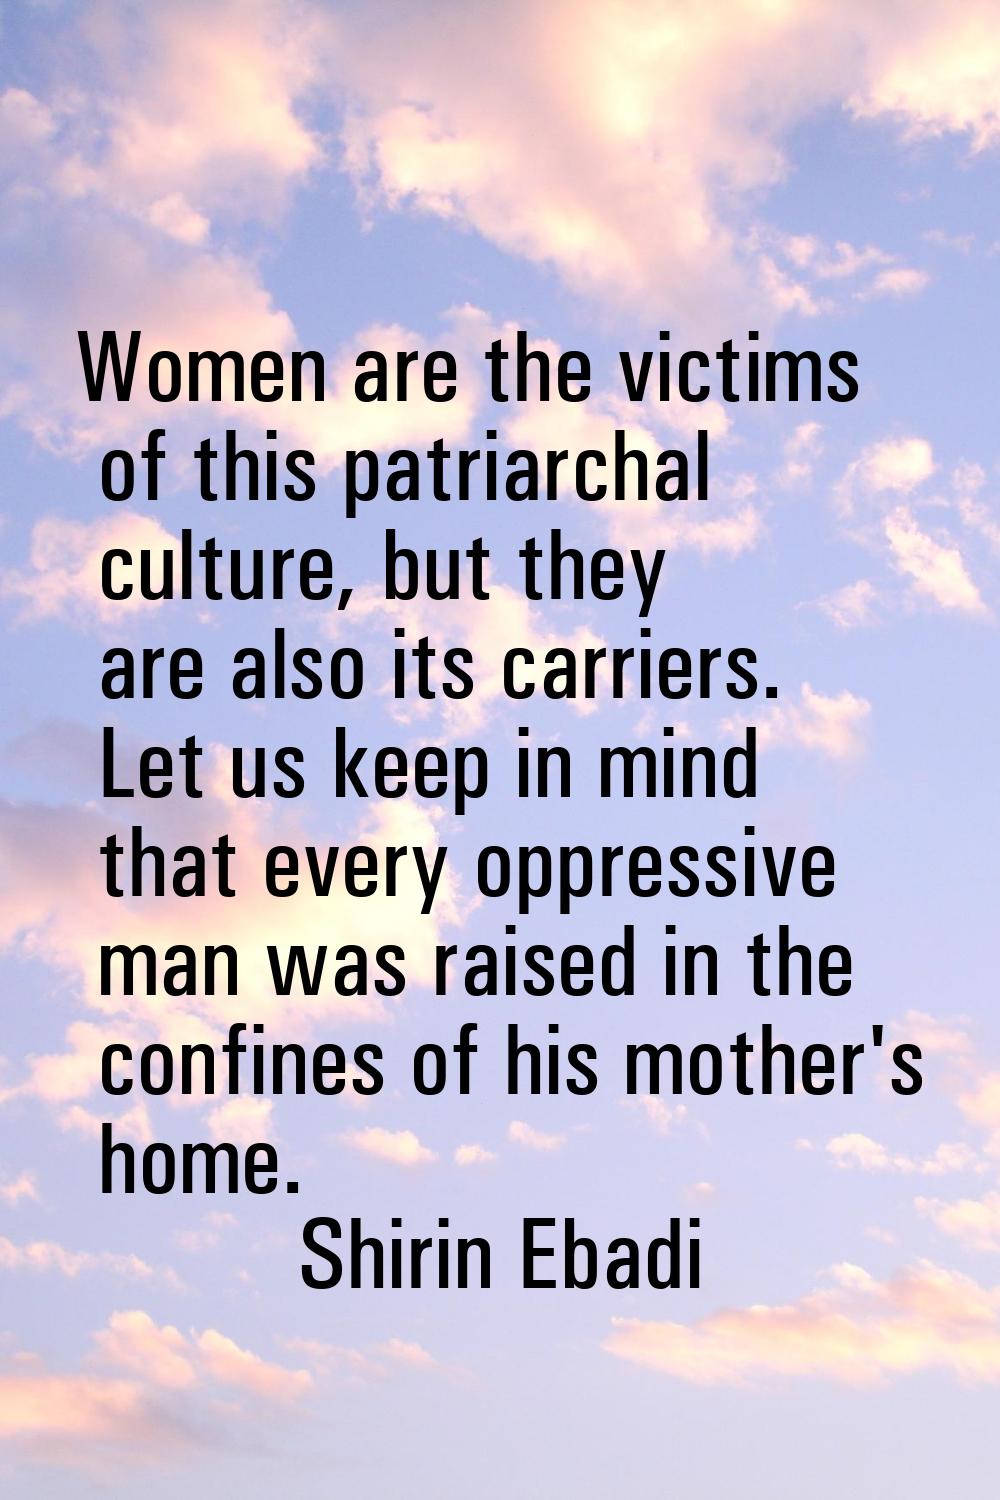 Women are the victims of this patriarchal culture, but they are also its carriers. Let us keep in m